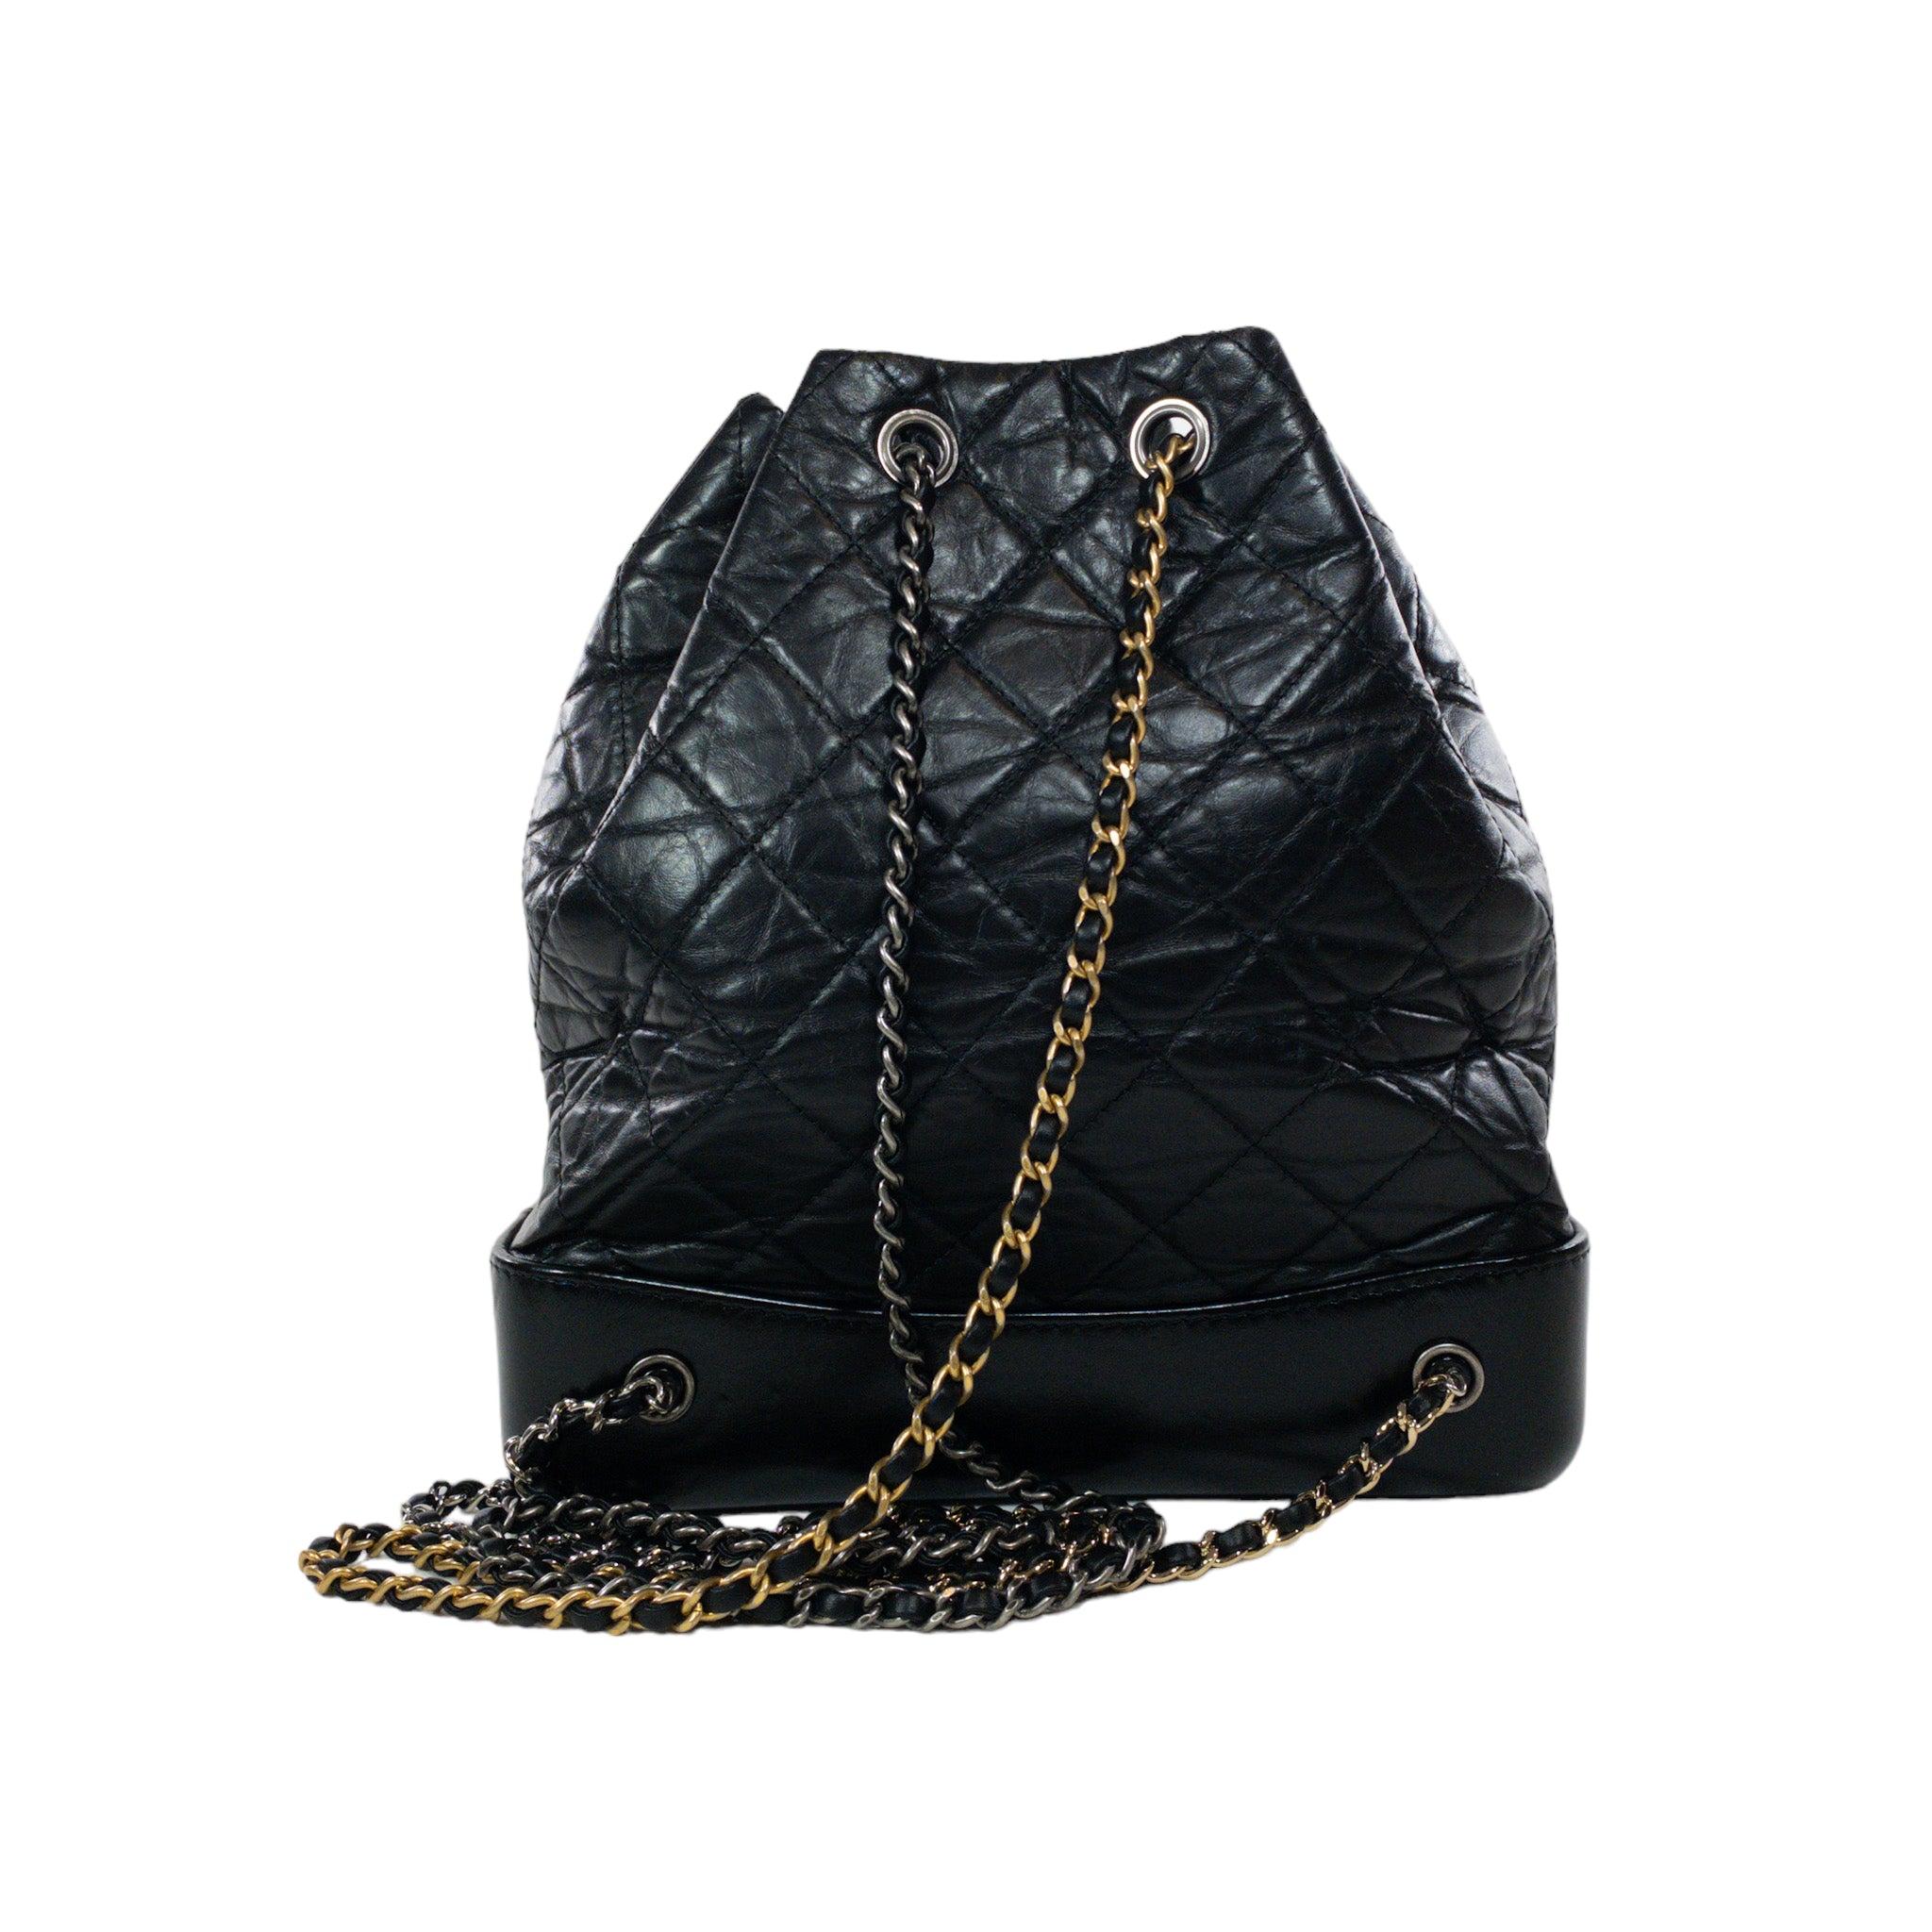 Chanel Small Black Gabrielle Backpack In Good Condition For Sale In Miami Beach, FL